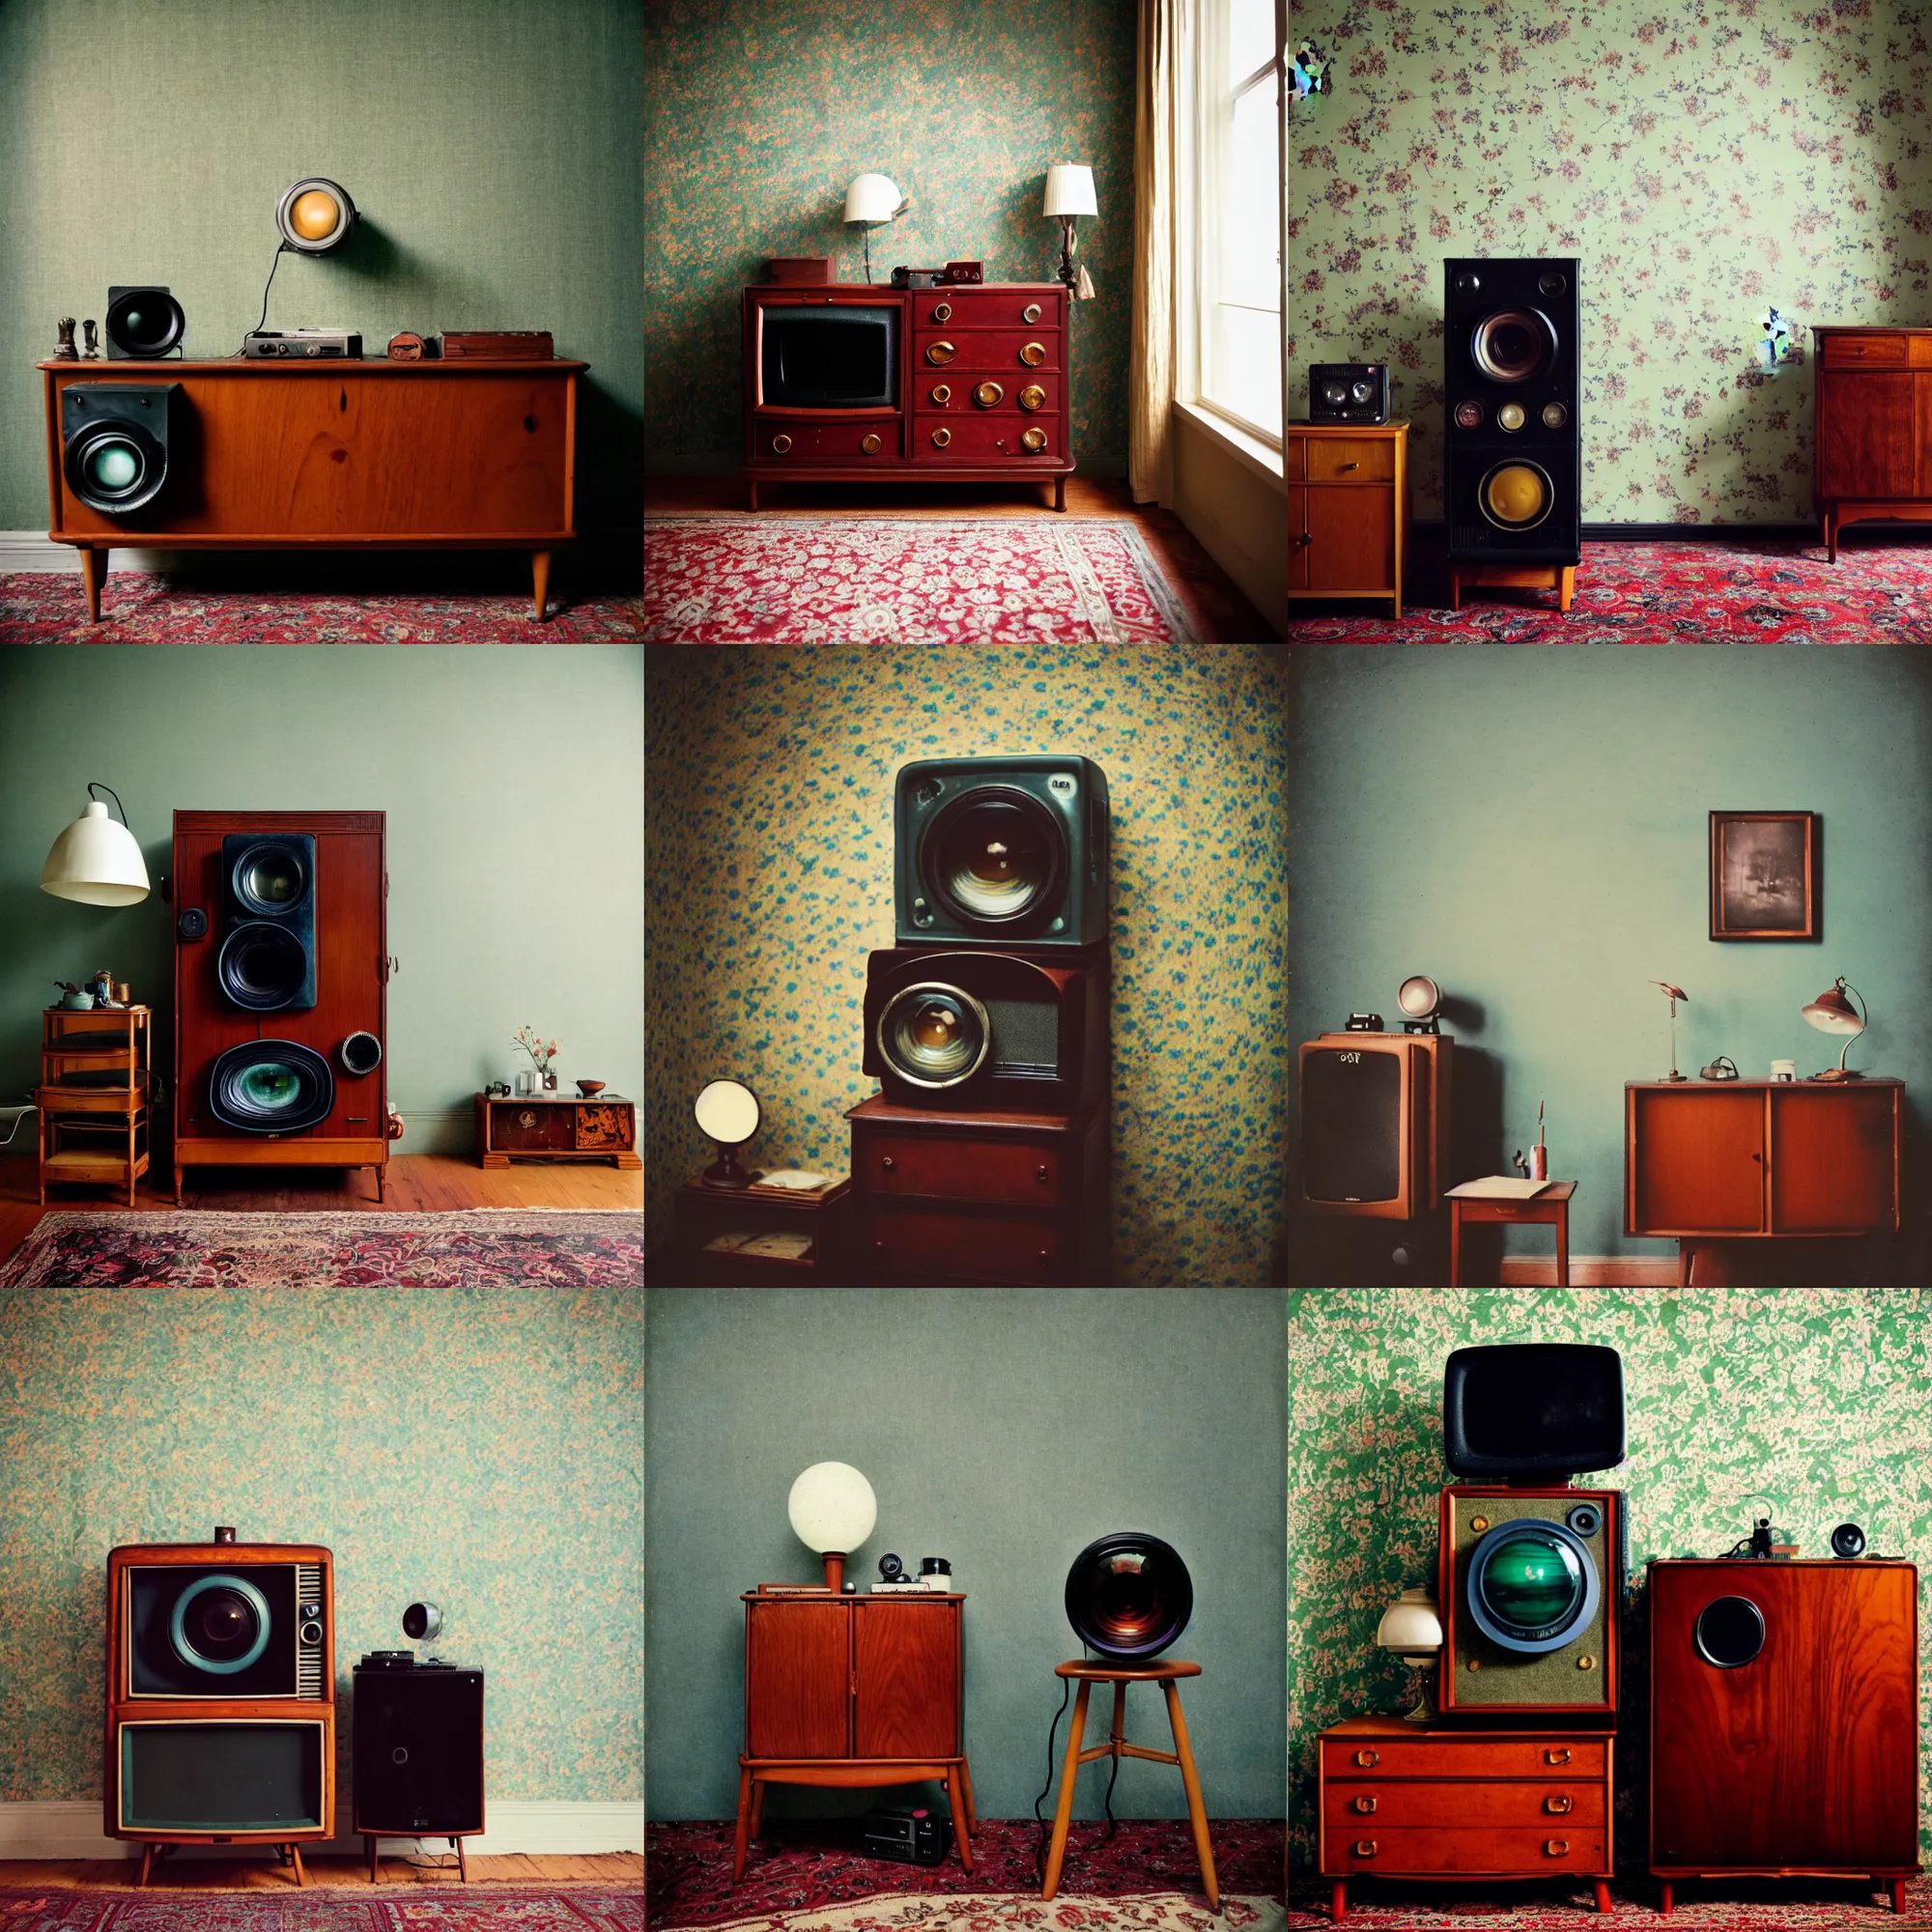 Prompt: kodak portra 4 0 0, wetplate, fisheye, portrait photo by britt marling, 1 9 2 0 s room, a giant vintage television, 1 9 2 0 s furniture, wallpaper, picture frames, carpet, shining lamp,, muted colours, blueberry, wood, fog,